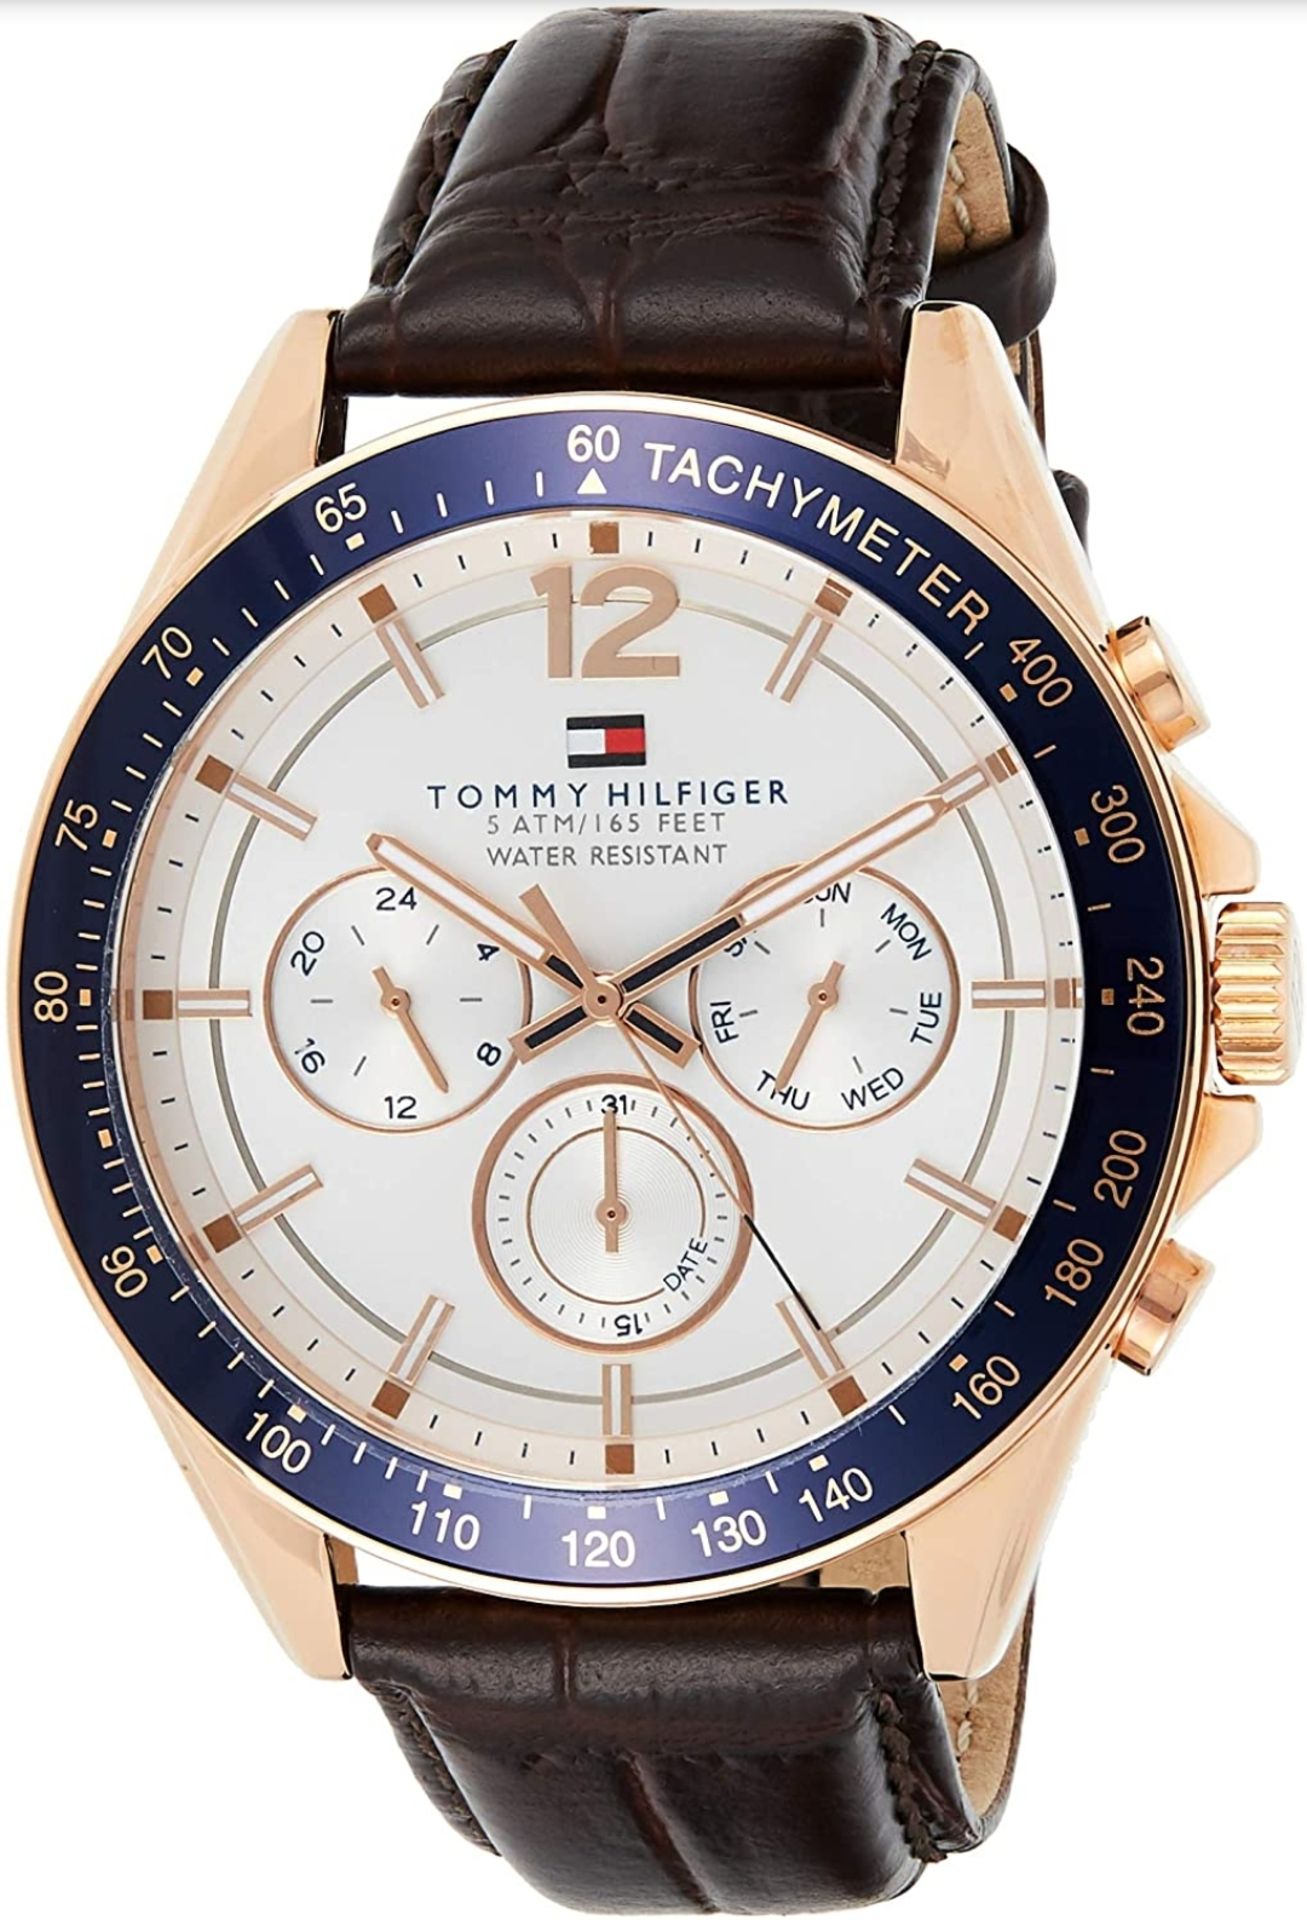 Men's Tommy Hilfiger Brown Leather Strap Chronograph Watch 1791118 - Image 2 of 7